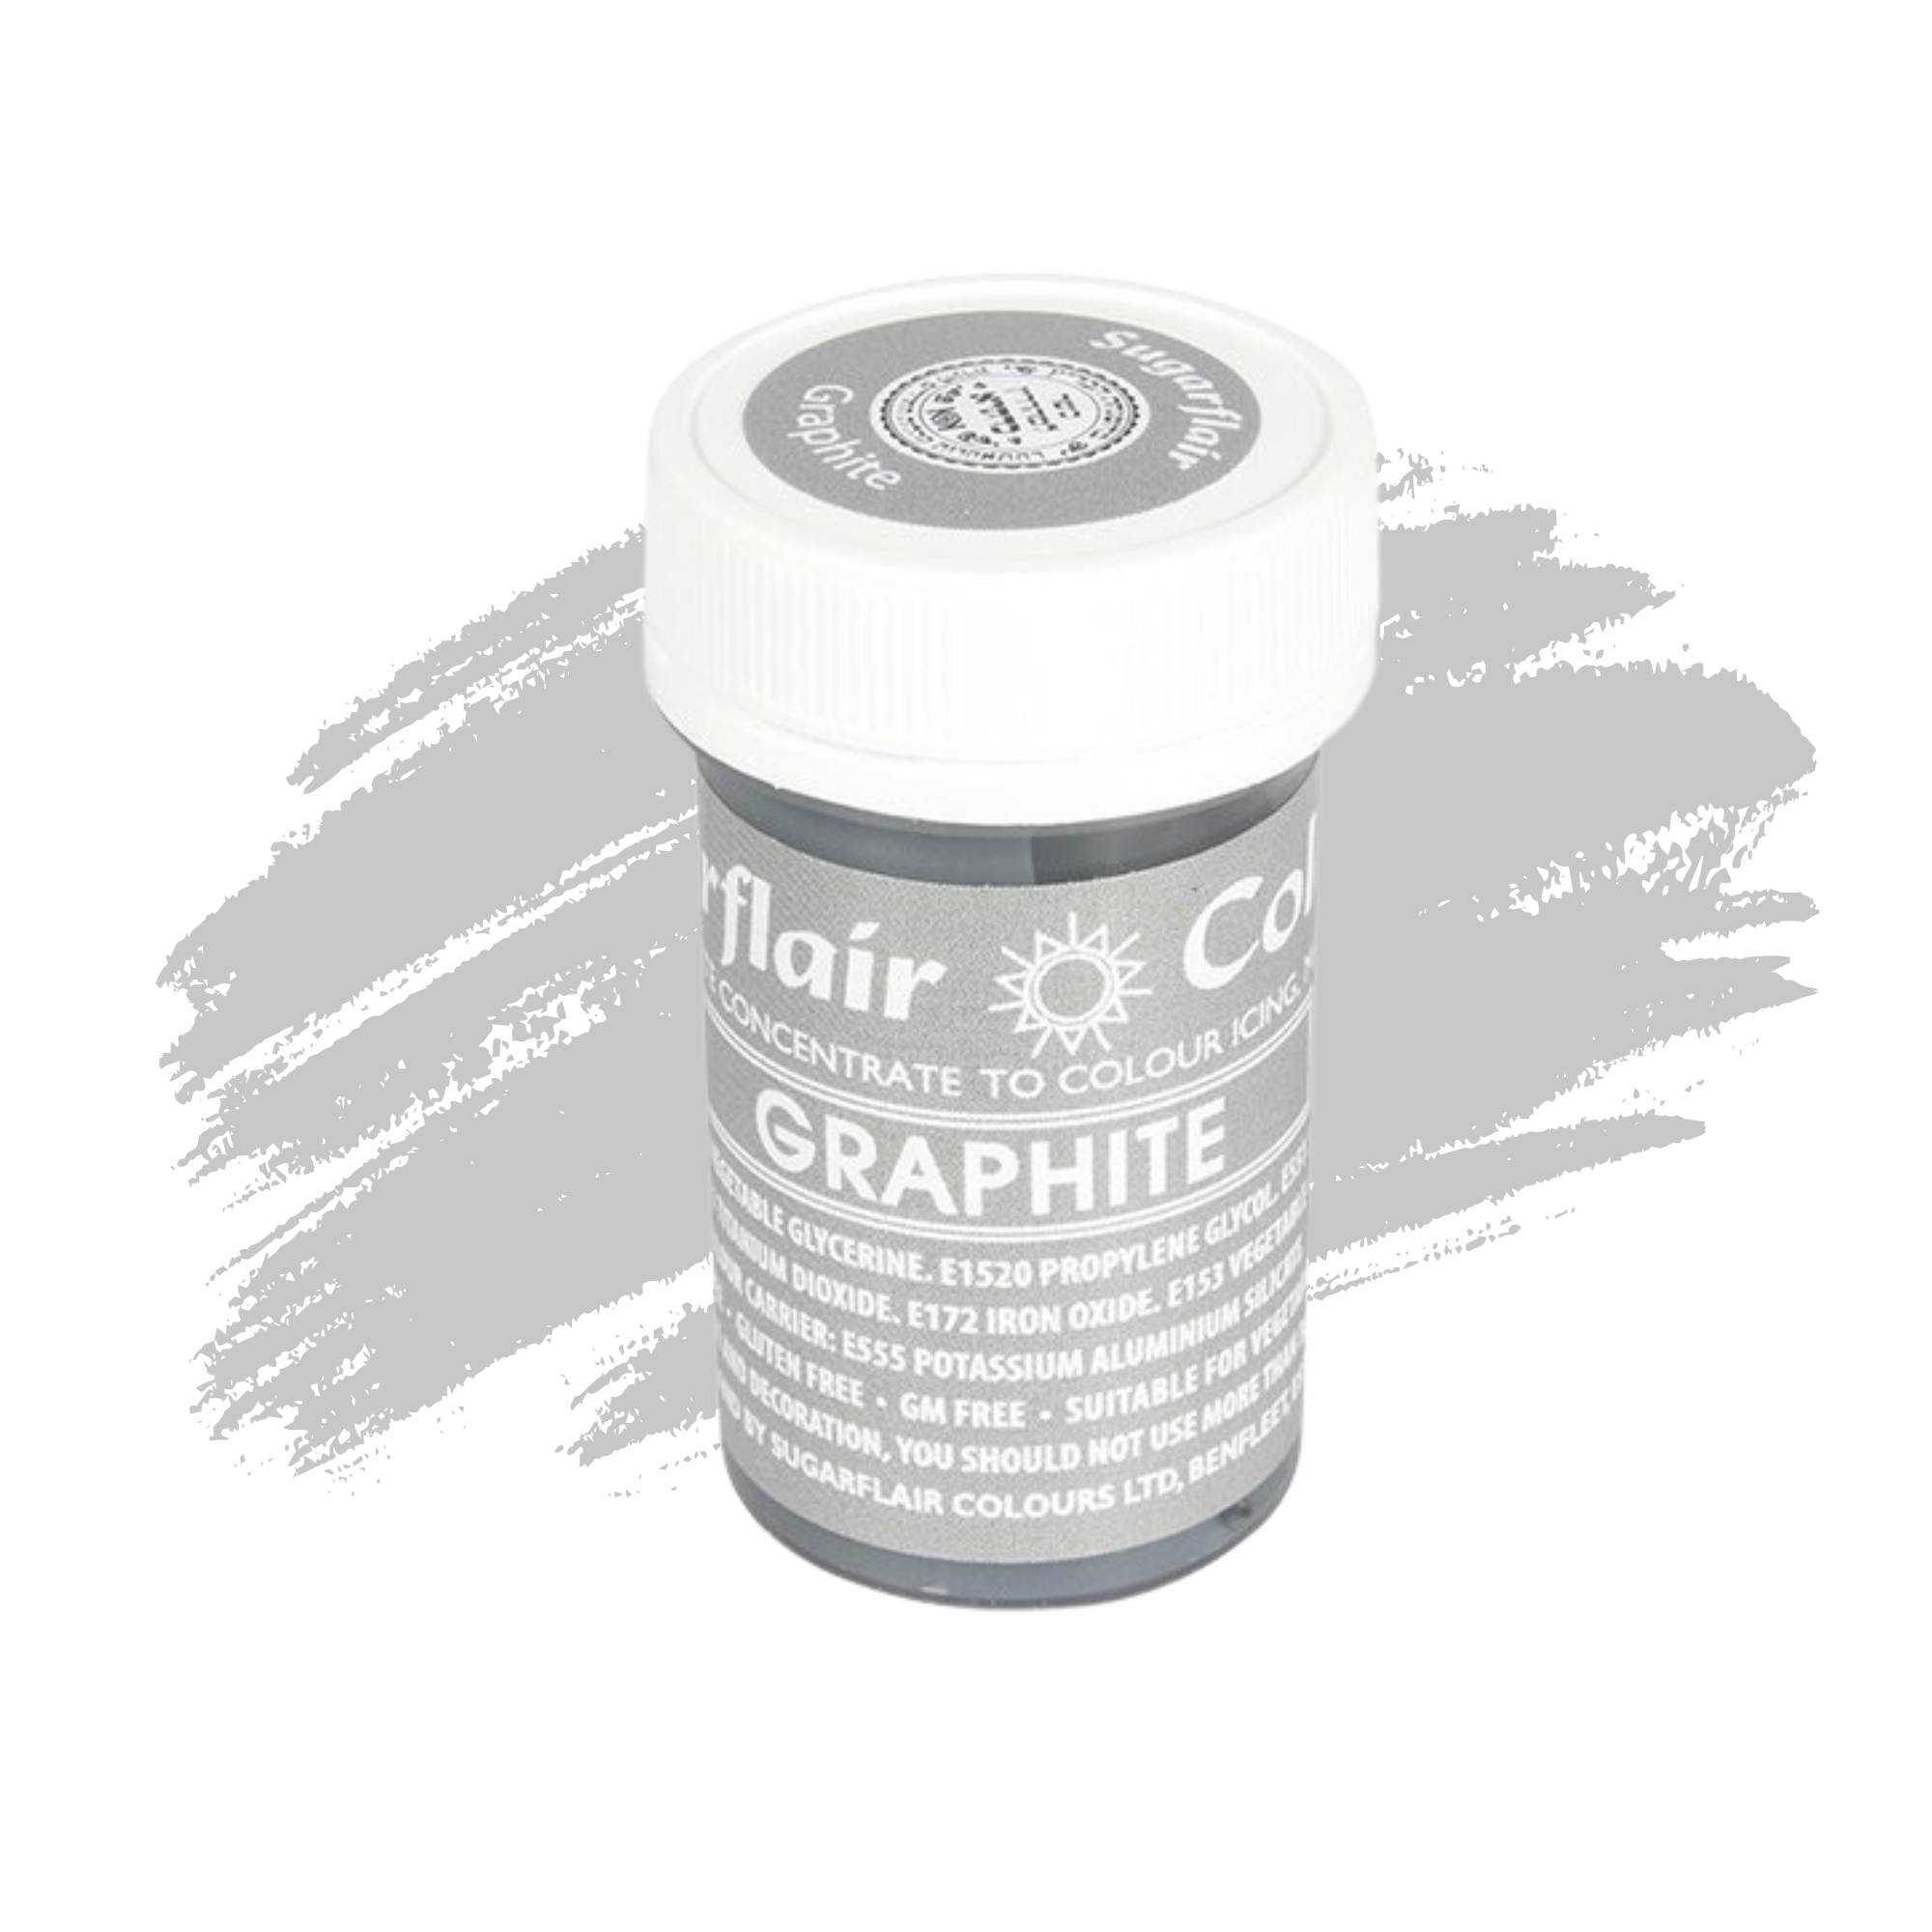 Sugarflair Paste Colours Concentrated Food Colouring - Spectral Graphite Grey - 25g